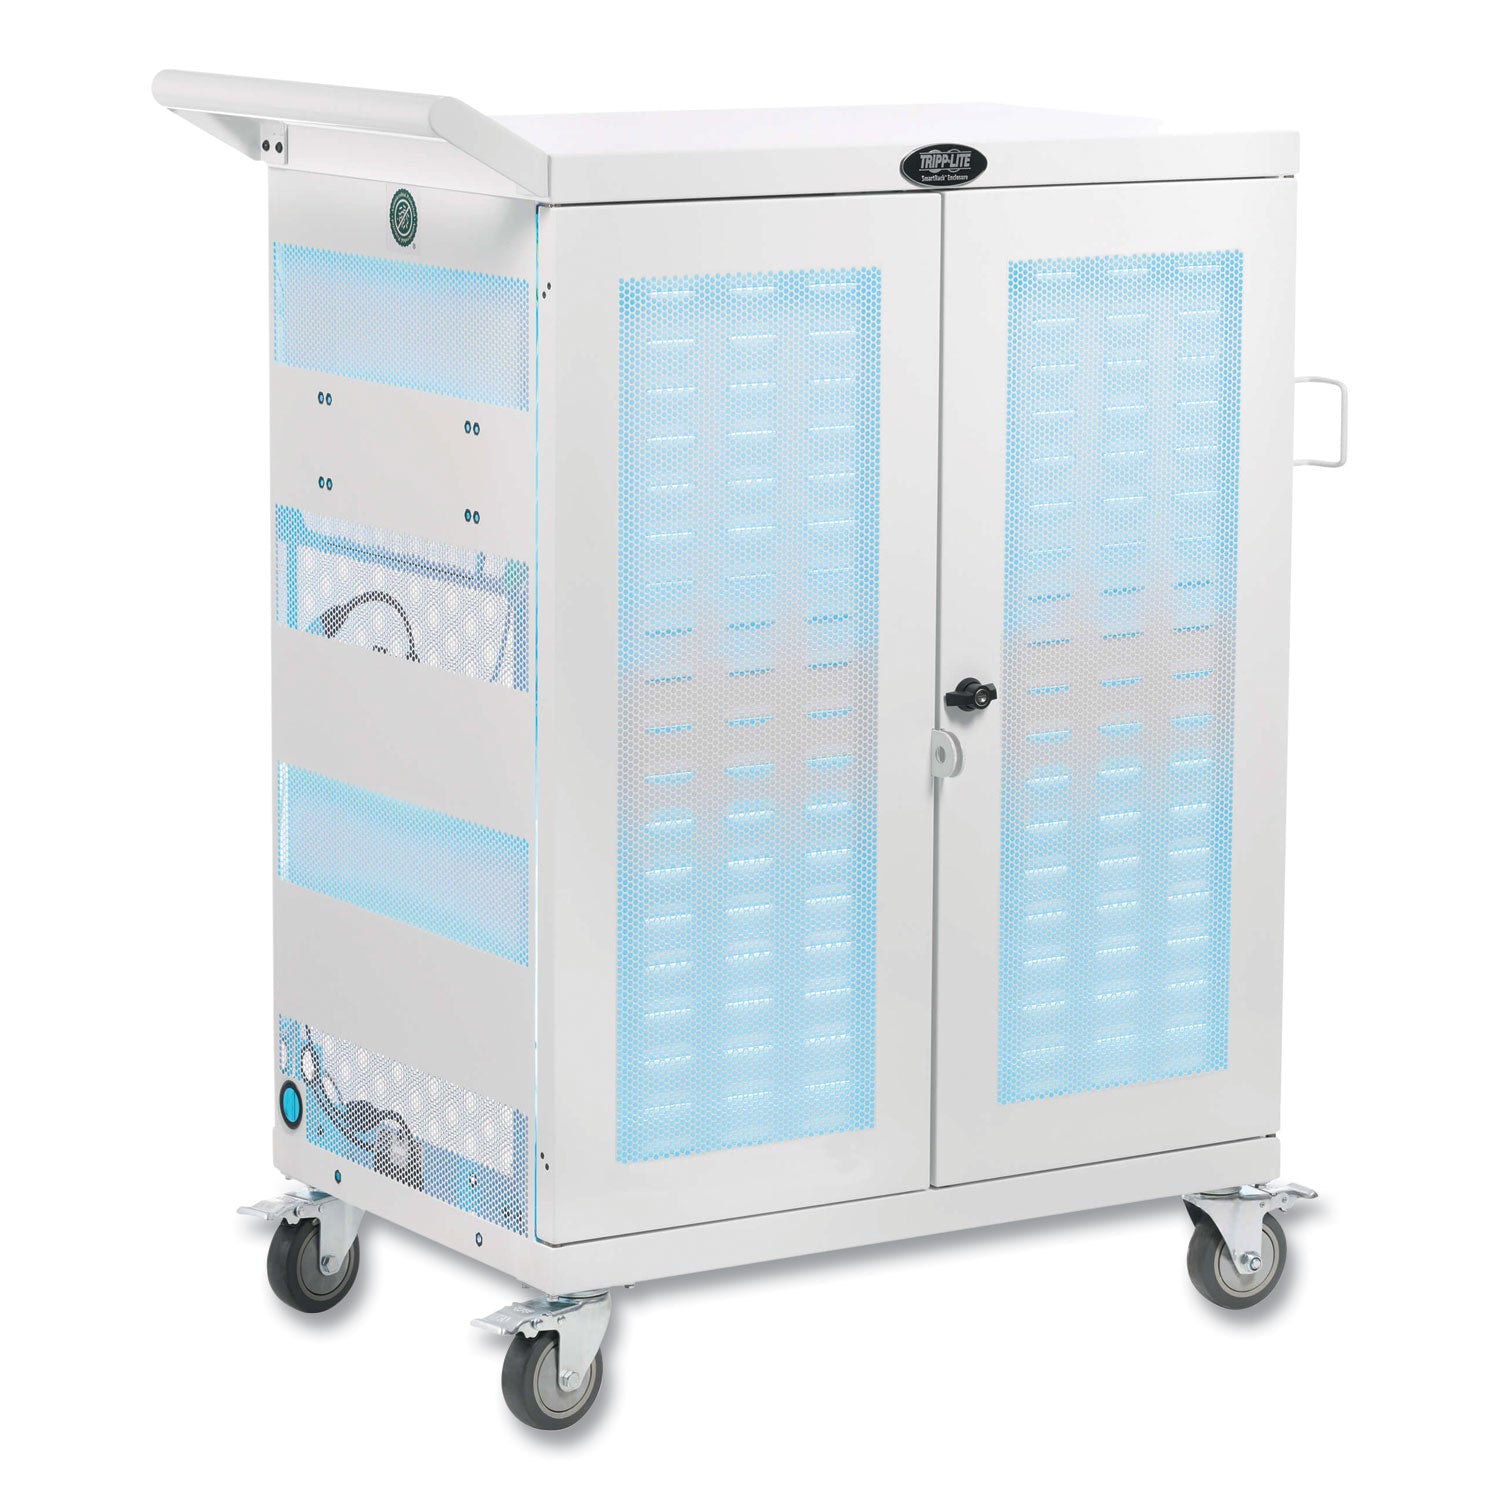 uv-sterilization-and-charging-cart-32-devices-348-x-216-x-423-white_trpcsc32acwhg - 1